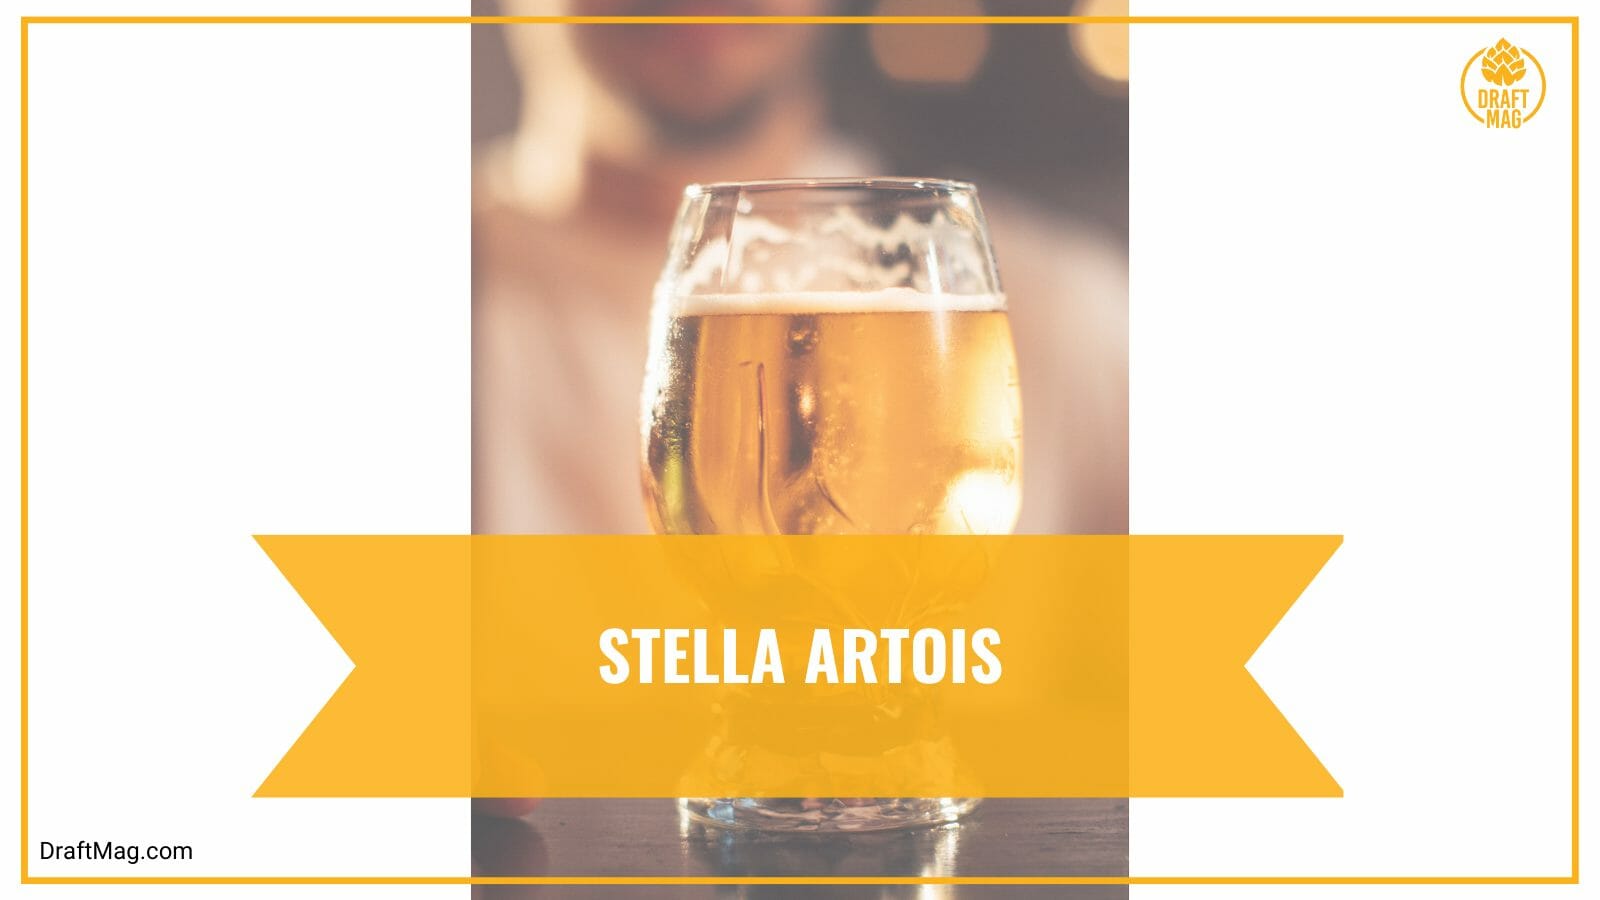 Stella artois with malty character